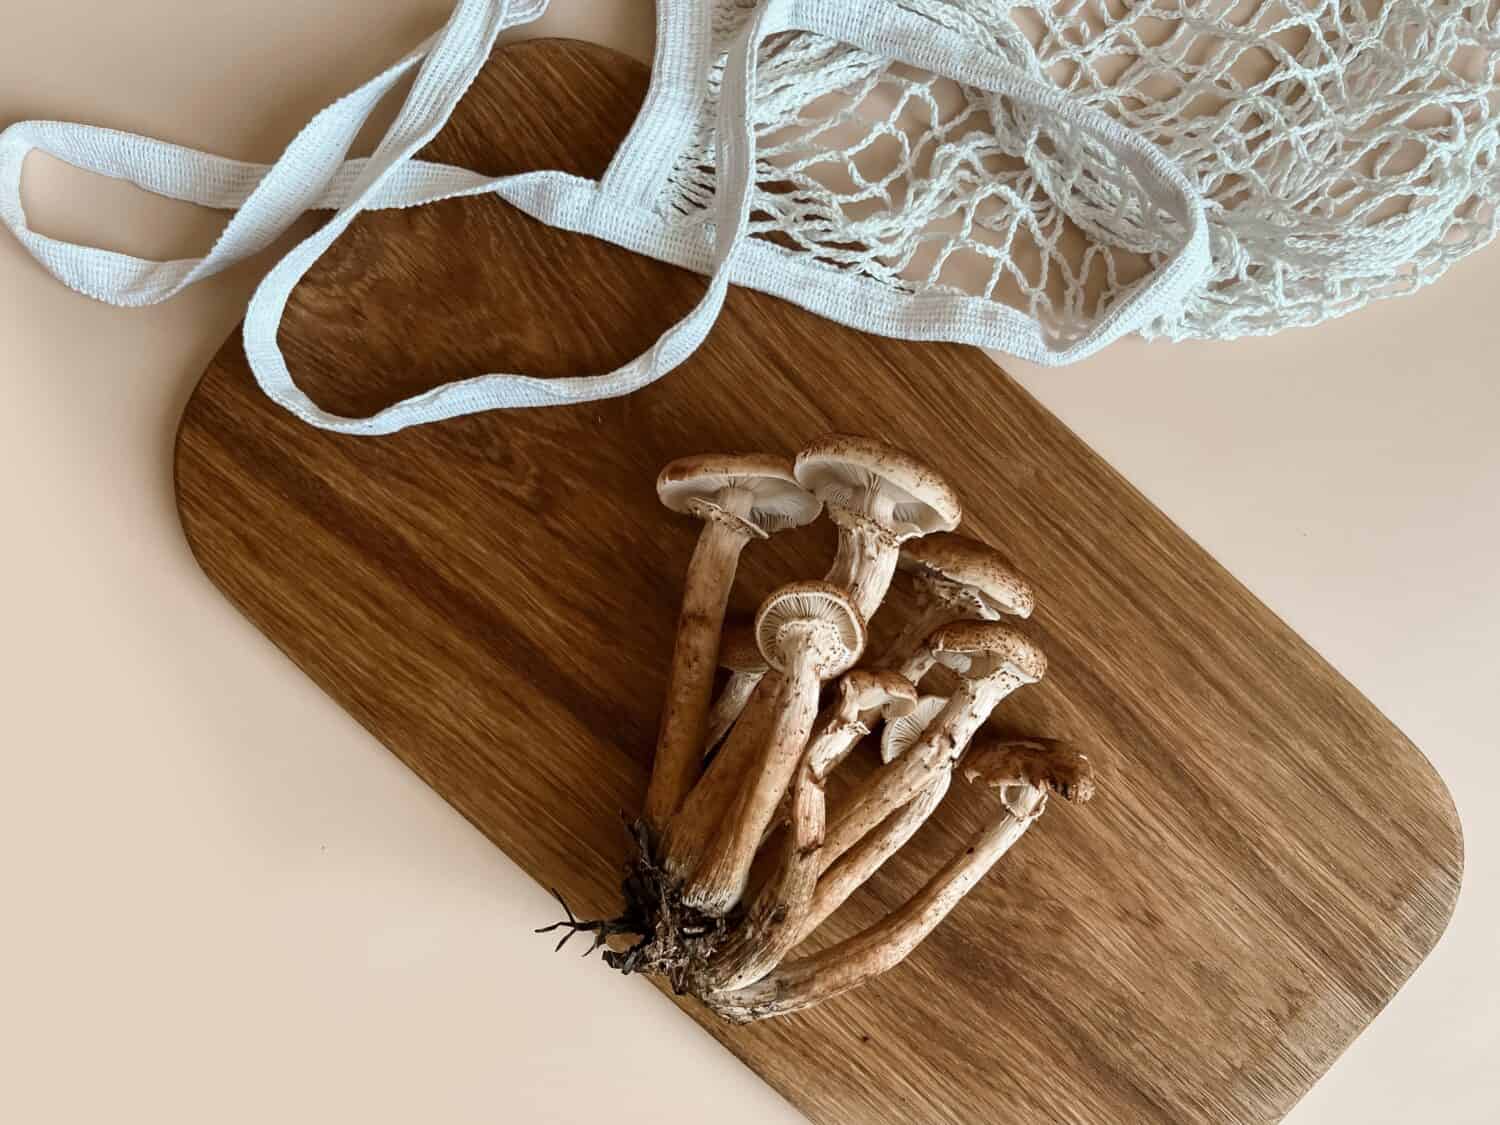 Mushrooms of honey mushrooms lie on a wooden oak board on a beige background next to a white braided string bag. Mushroom picking. Copy space. Top view.